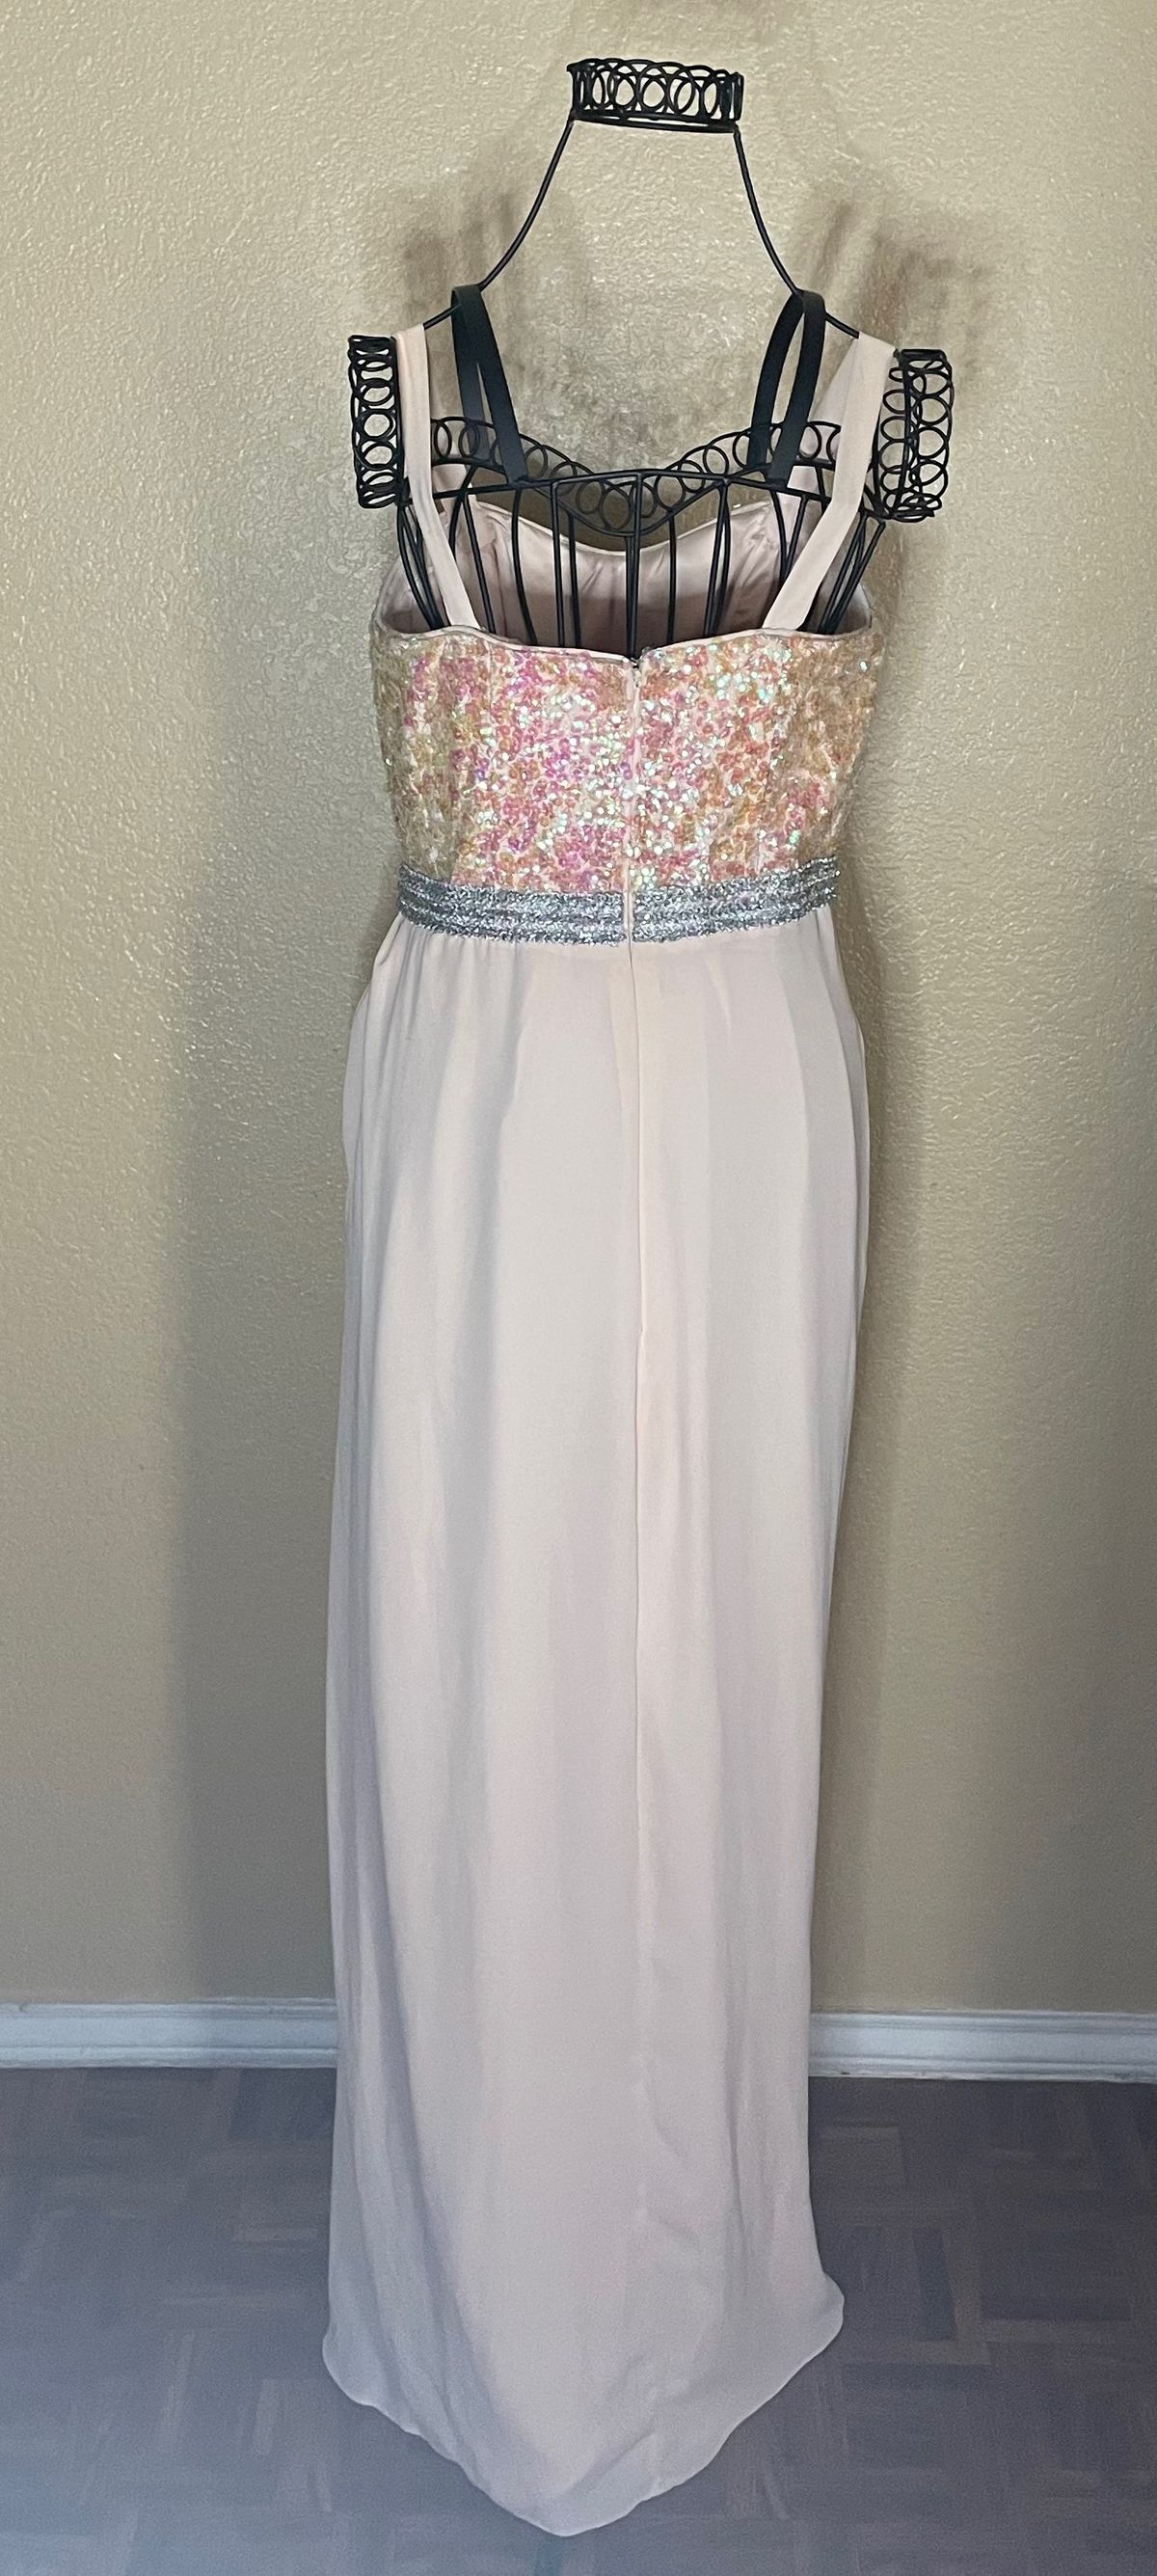 Belle Badgley Mischka Size 4 Prom Sequined Light Pink A-line Dress on Queenly